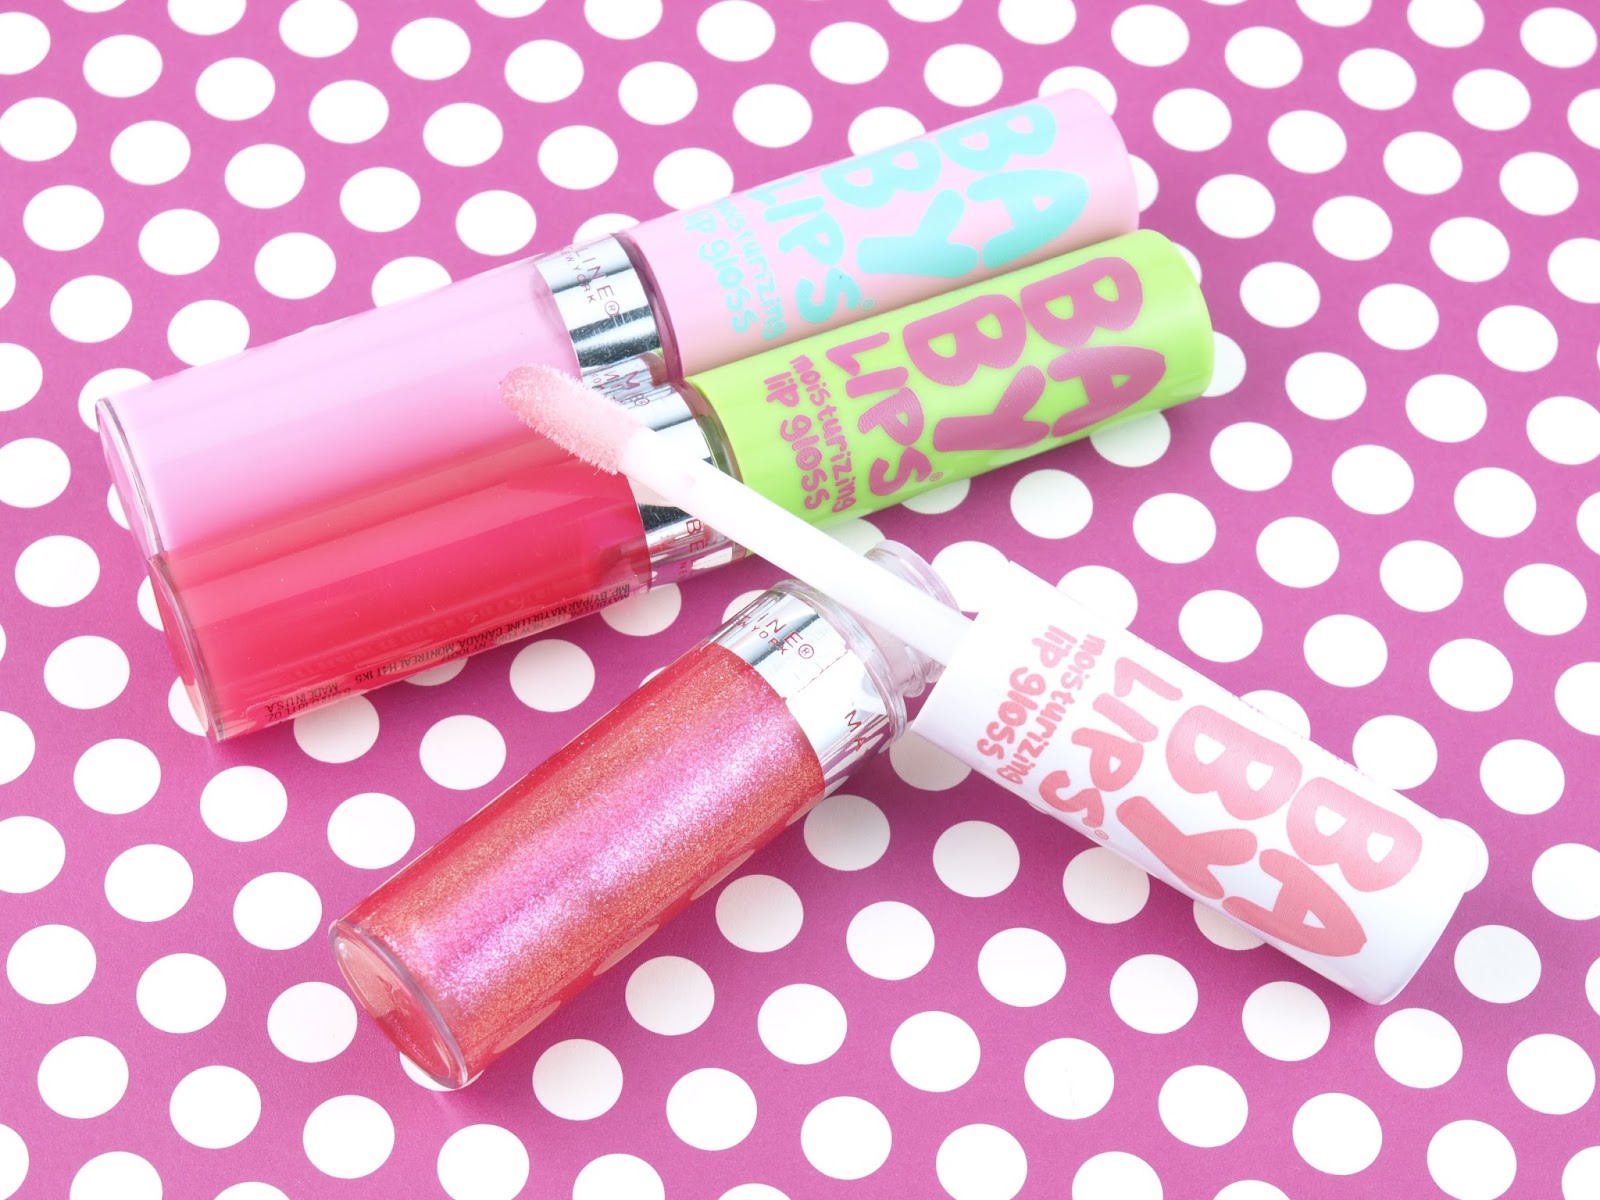 Maybelline Baby Lips Moisturizing Lip Gloss: Review and Swatches